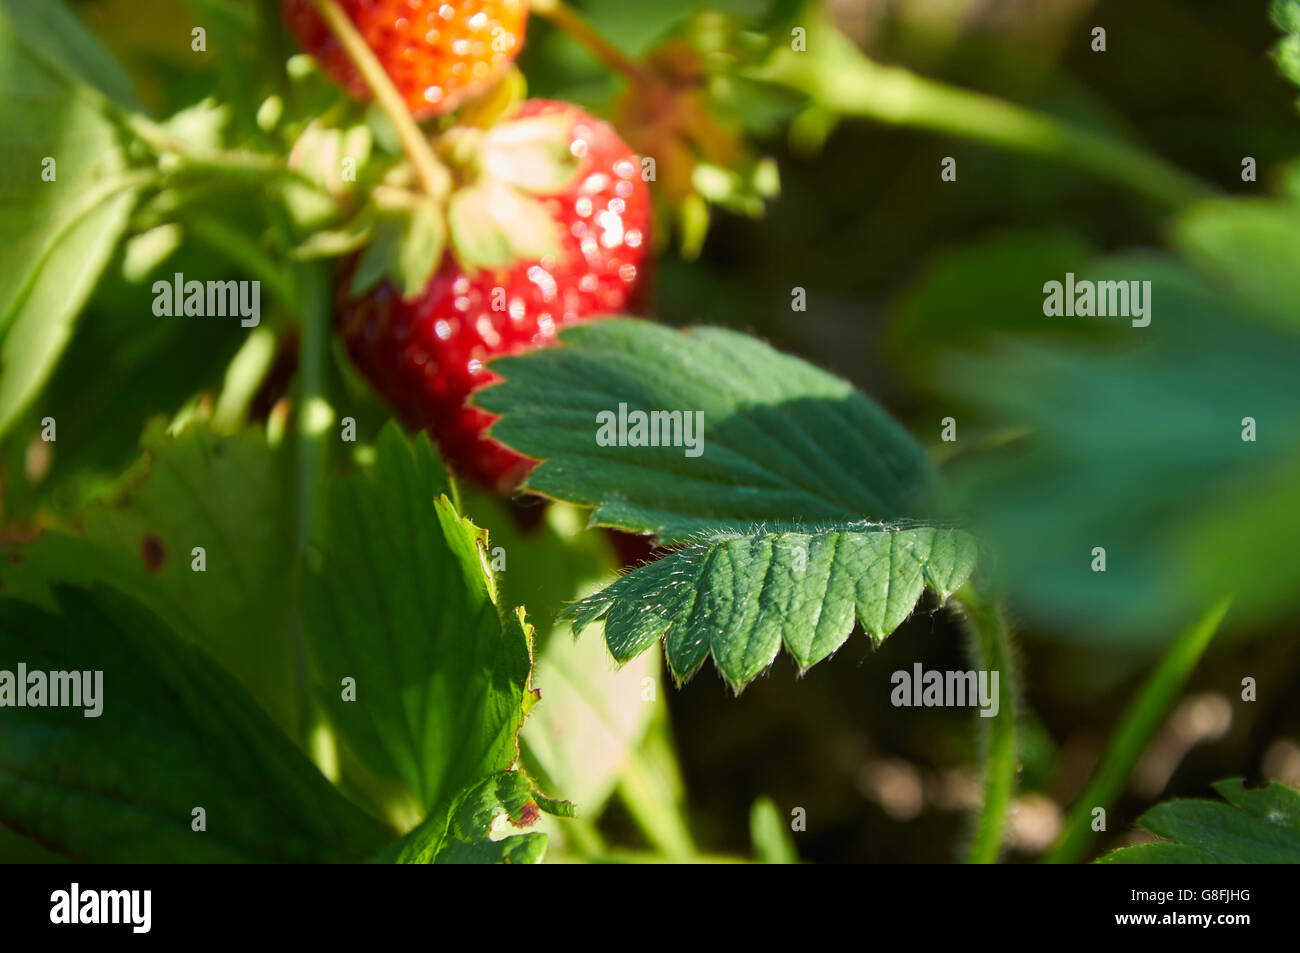 Close-up photo of strawberry leaf in evening light Stock Photo